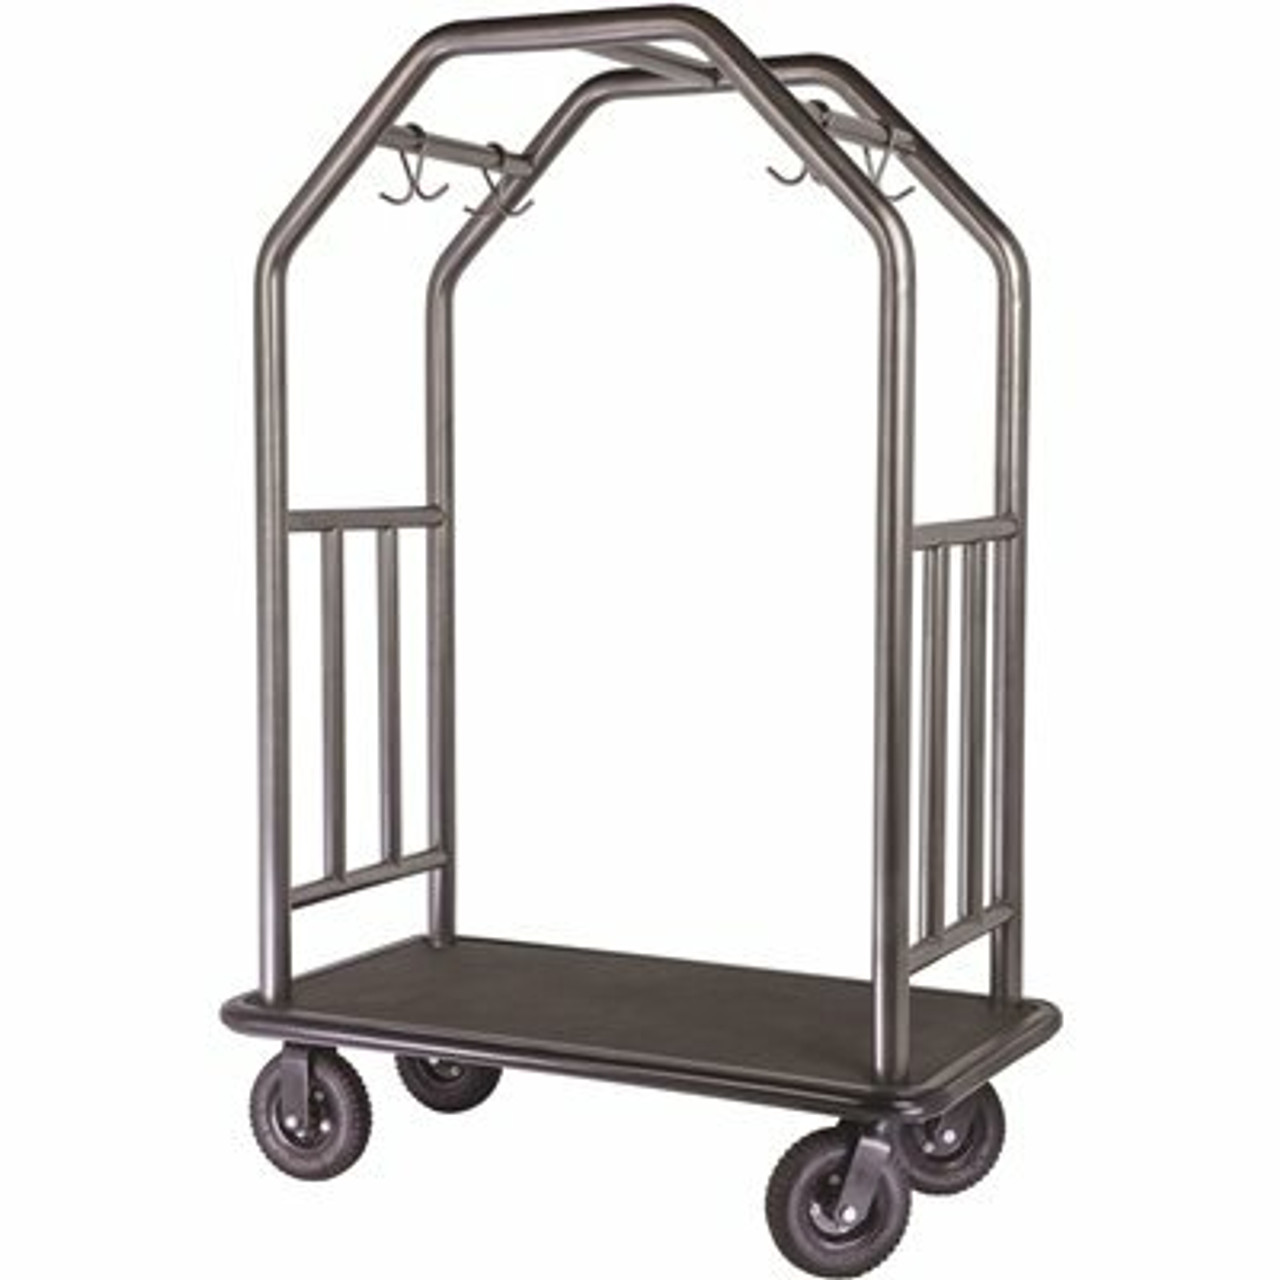 Hospitality 1 Source Coastal Series Powder Coated Stainless Steel Bellman's Cart With Black Rubber Mat Deck